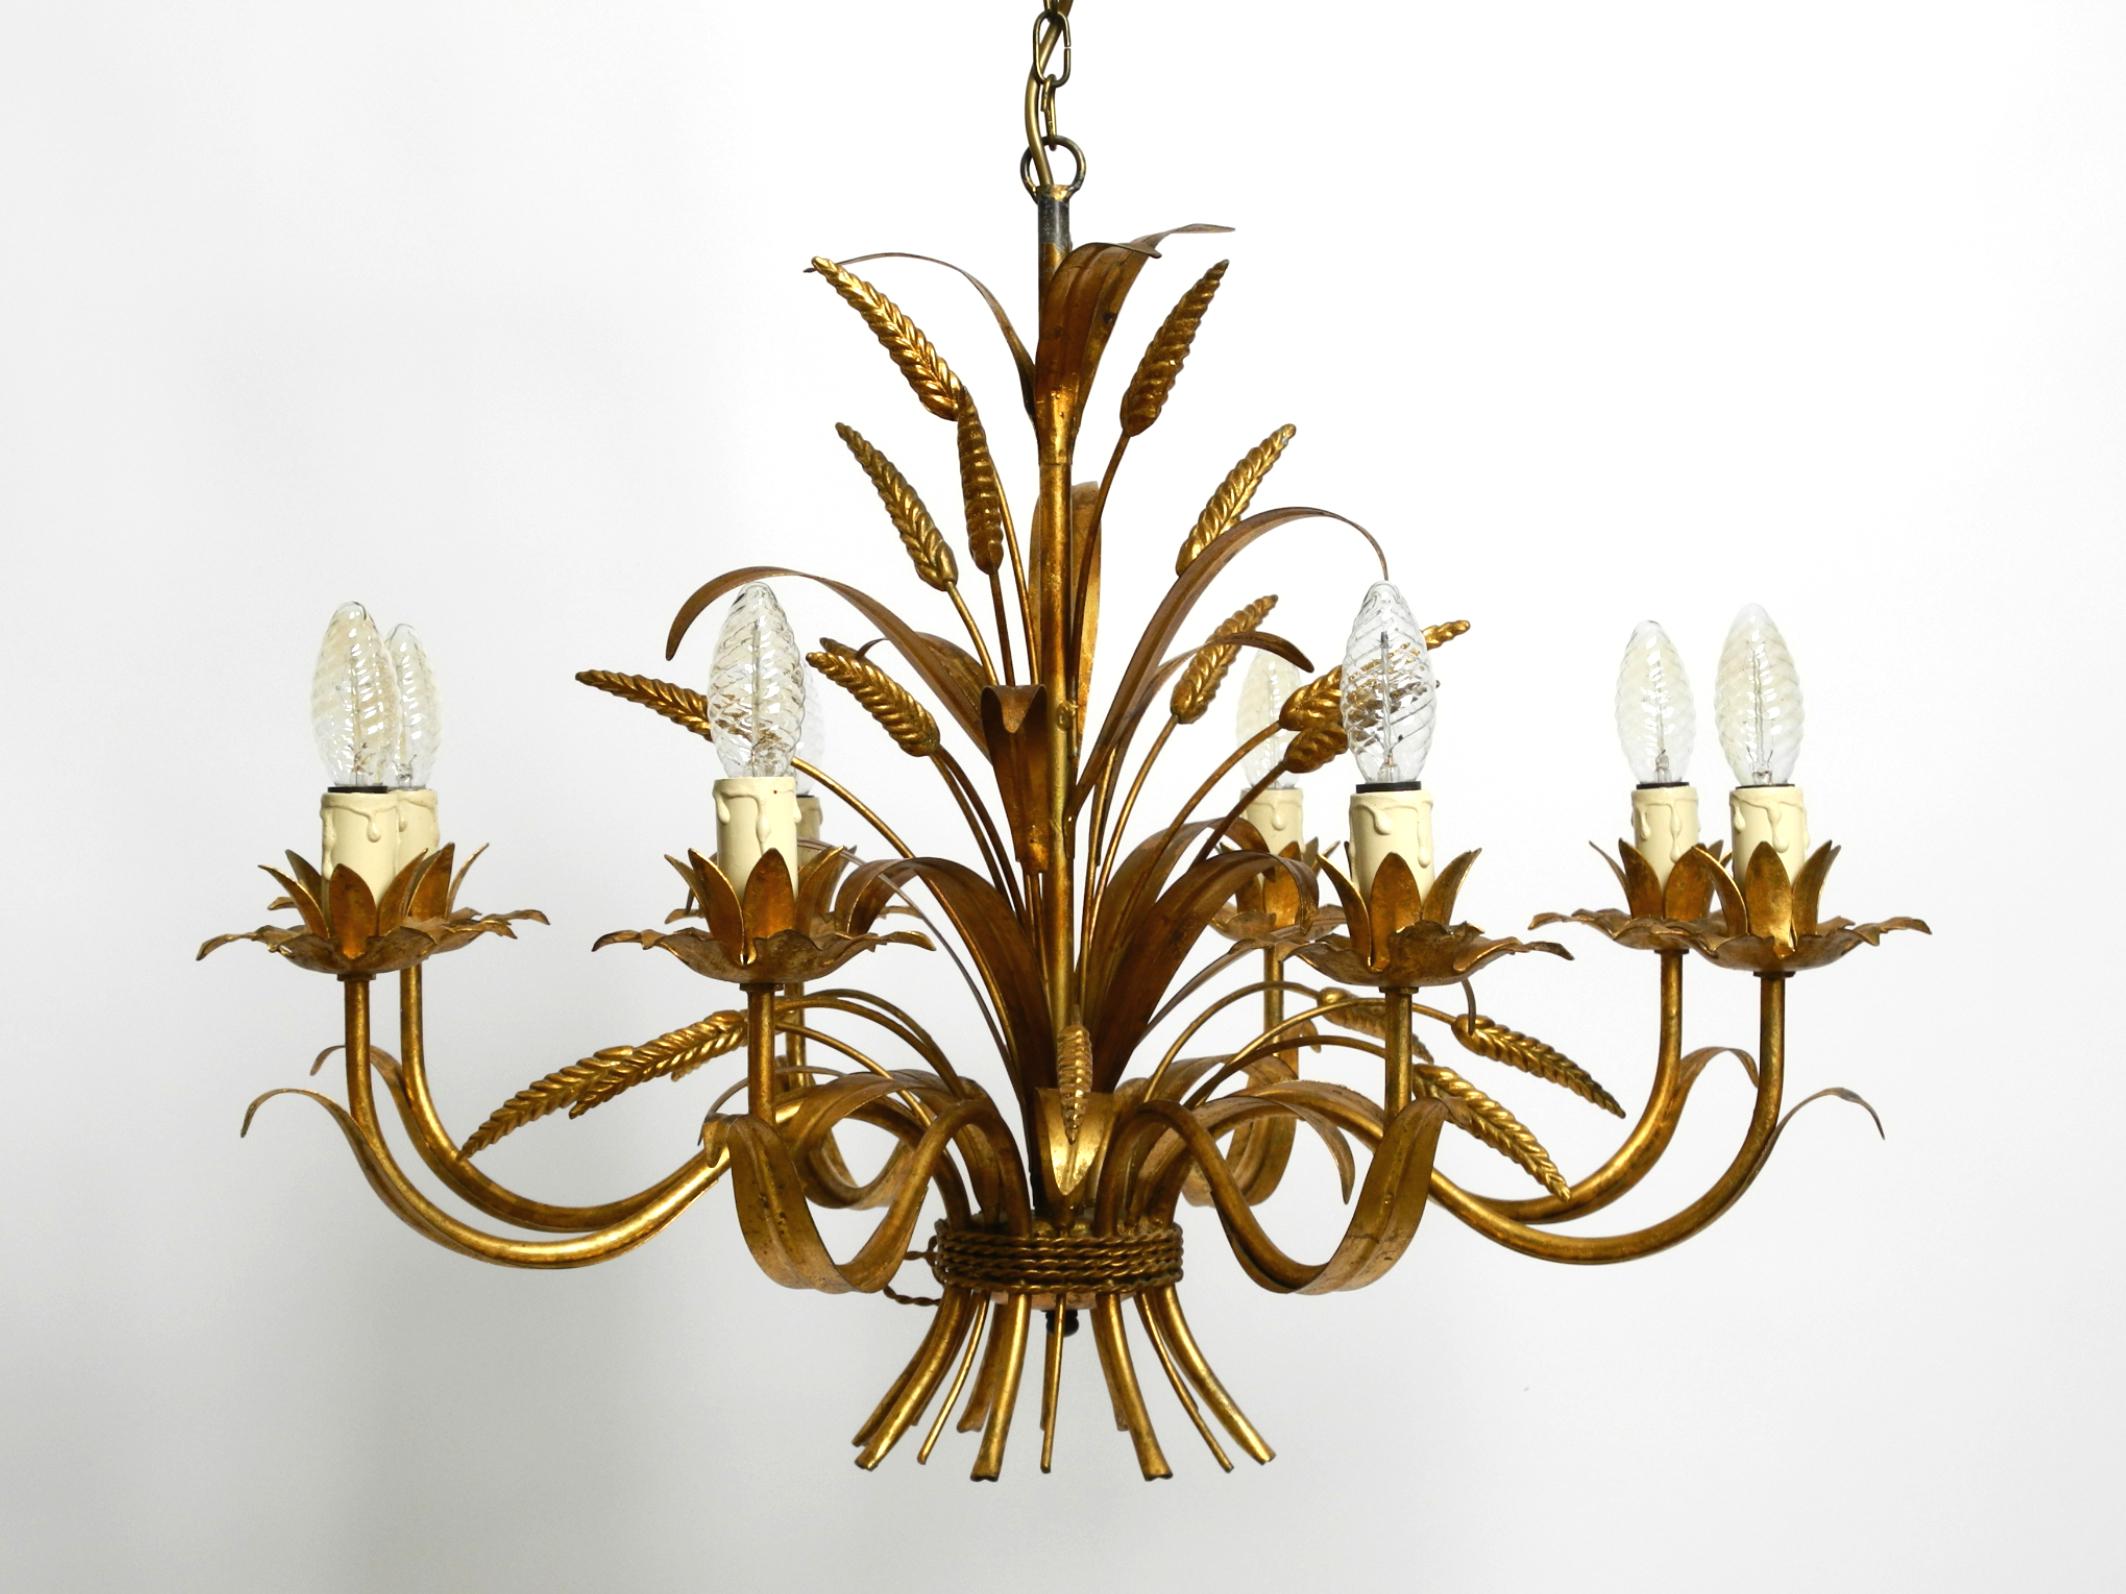 Beautiful 1970s gold-plated 8-arm metal chandelier by Hans Kögl.
Hans Kögl was a famous lighting and table designer. He worked with natural shapes such as palm leaves and other plant forms. His designs were produced in both Germany and